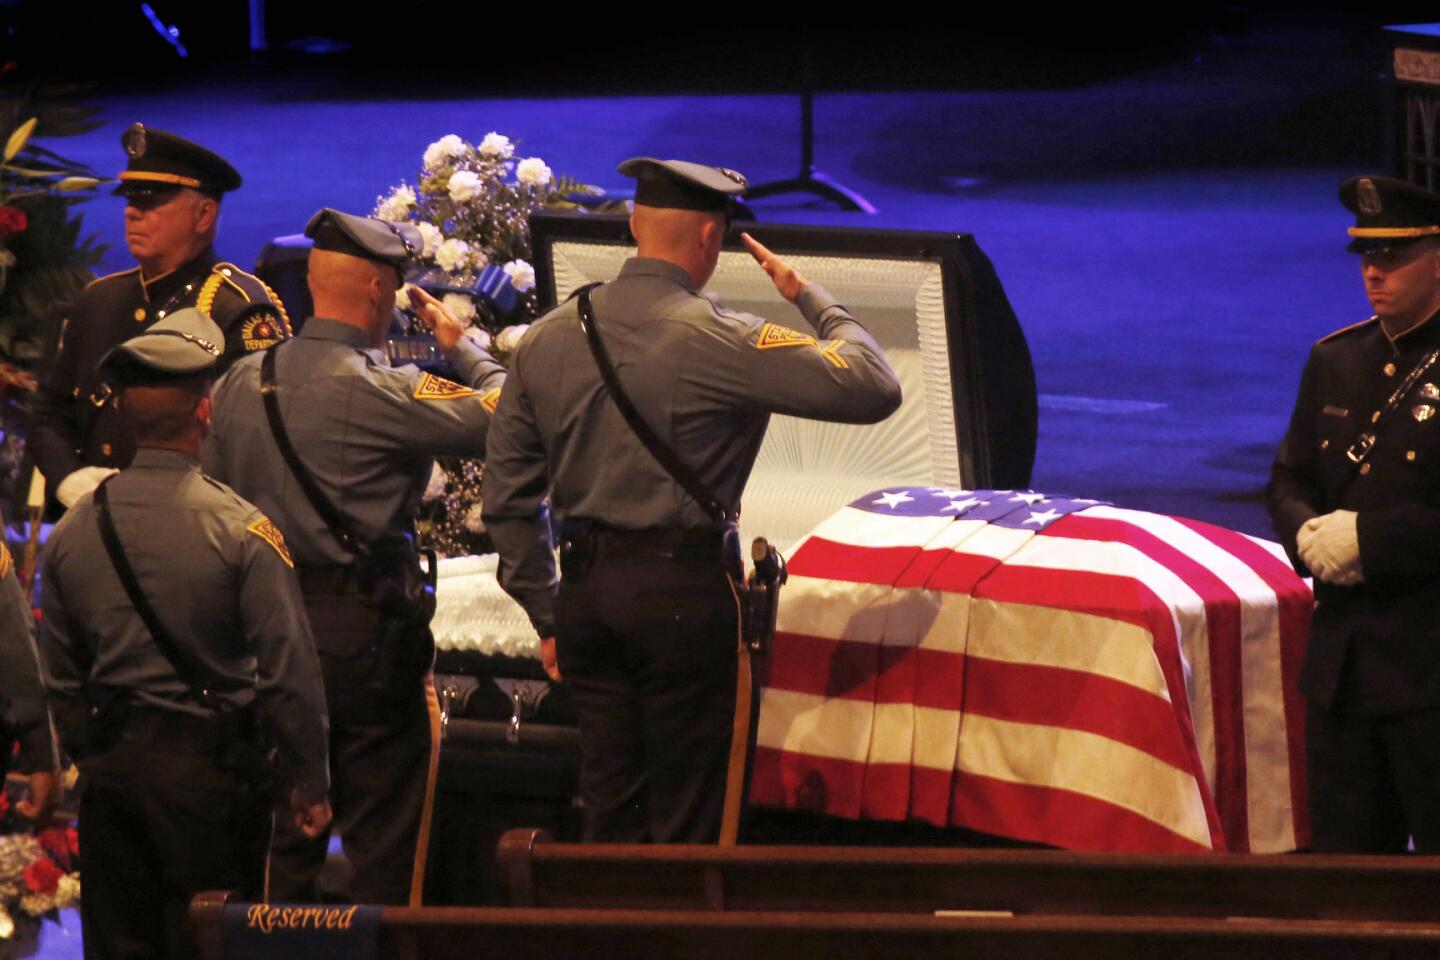 Funeral services are held for Dallas Police Sr. Cpl. Lorne Ahrens at Prestonwood Baptist Church in Plano, Texas.